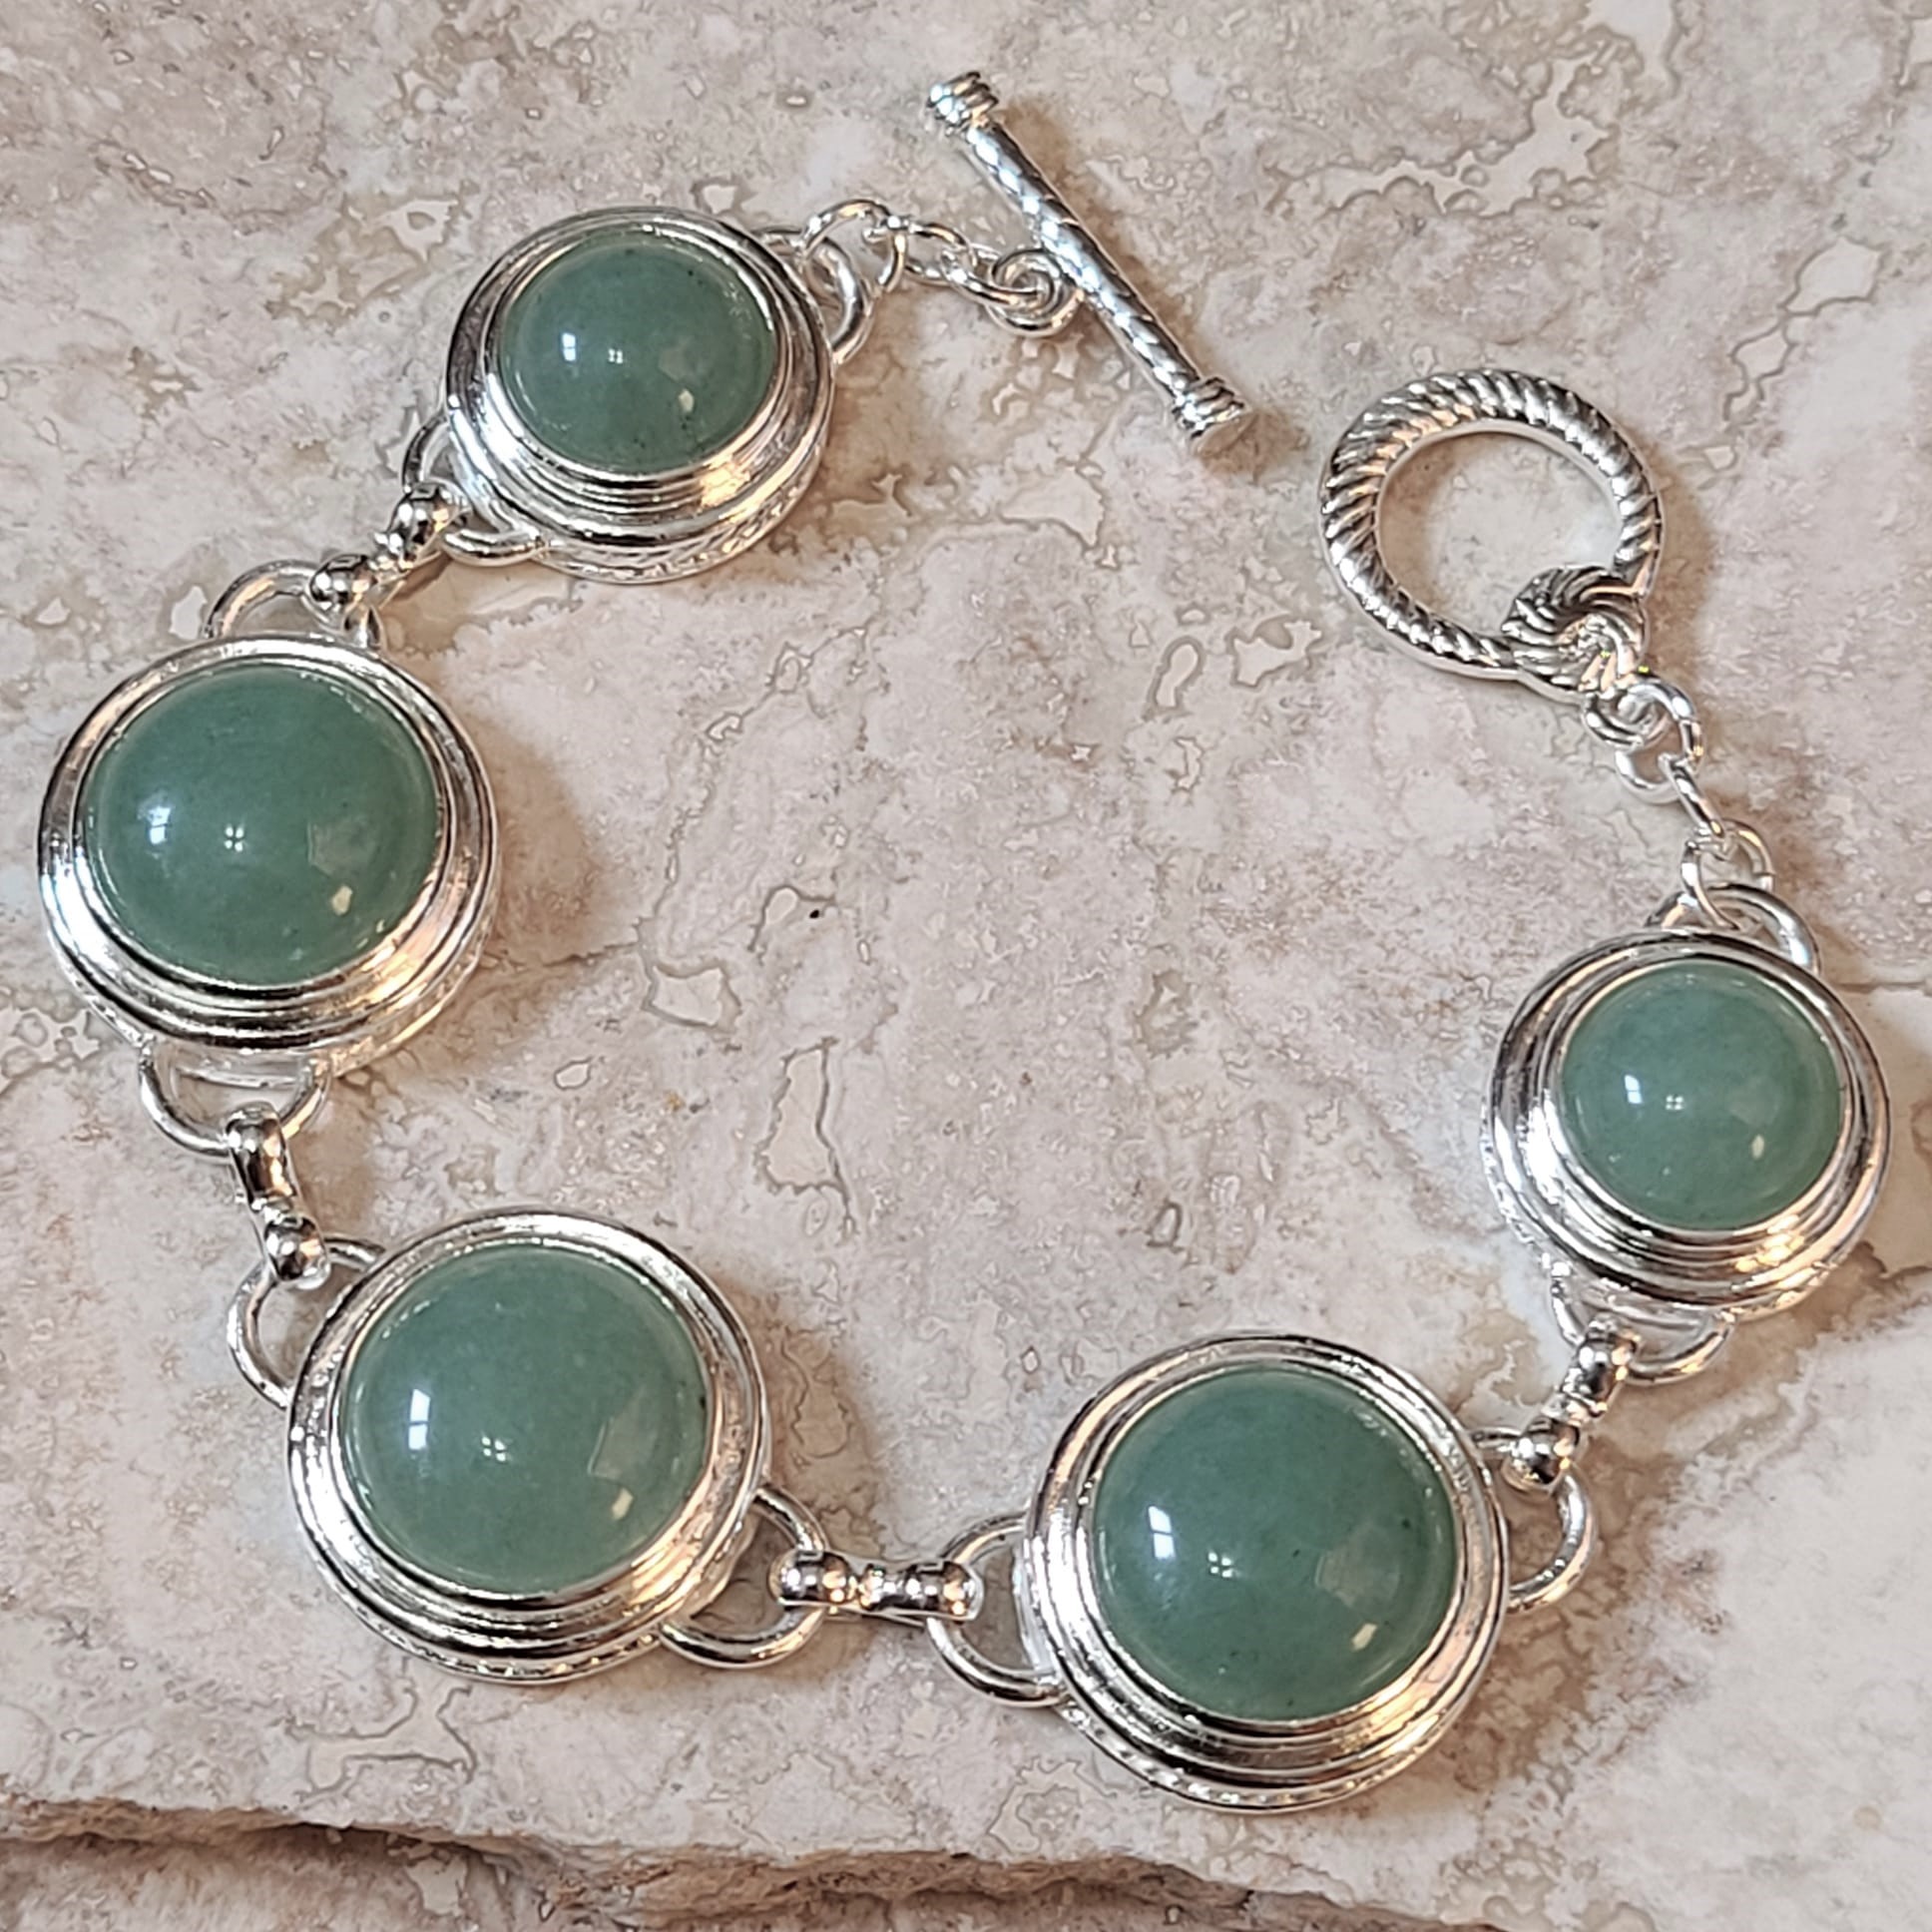 Green Jade and 925 Sterling Silver Plated Bracelet